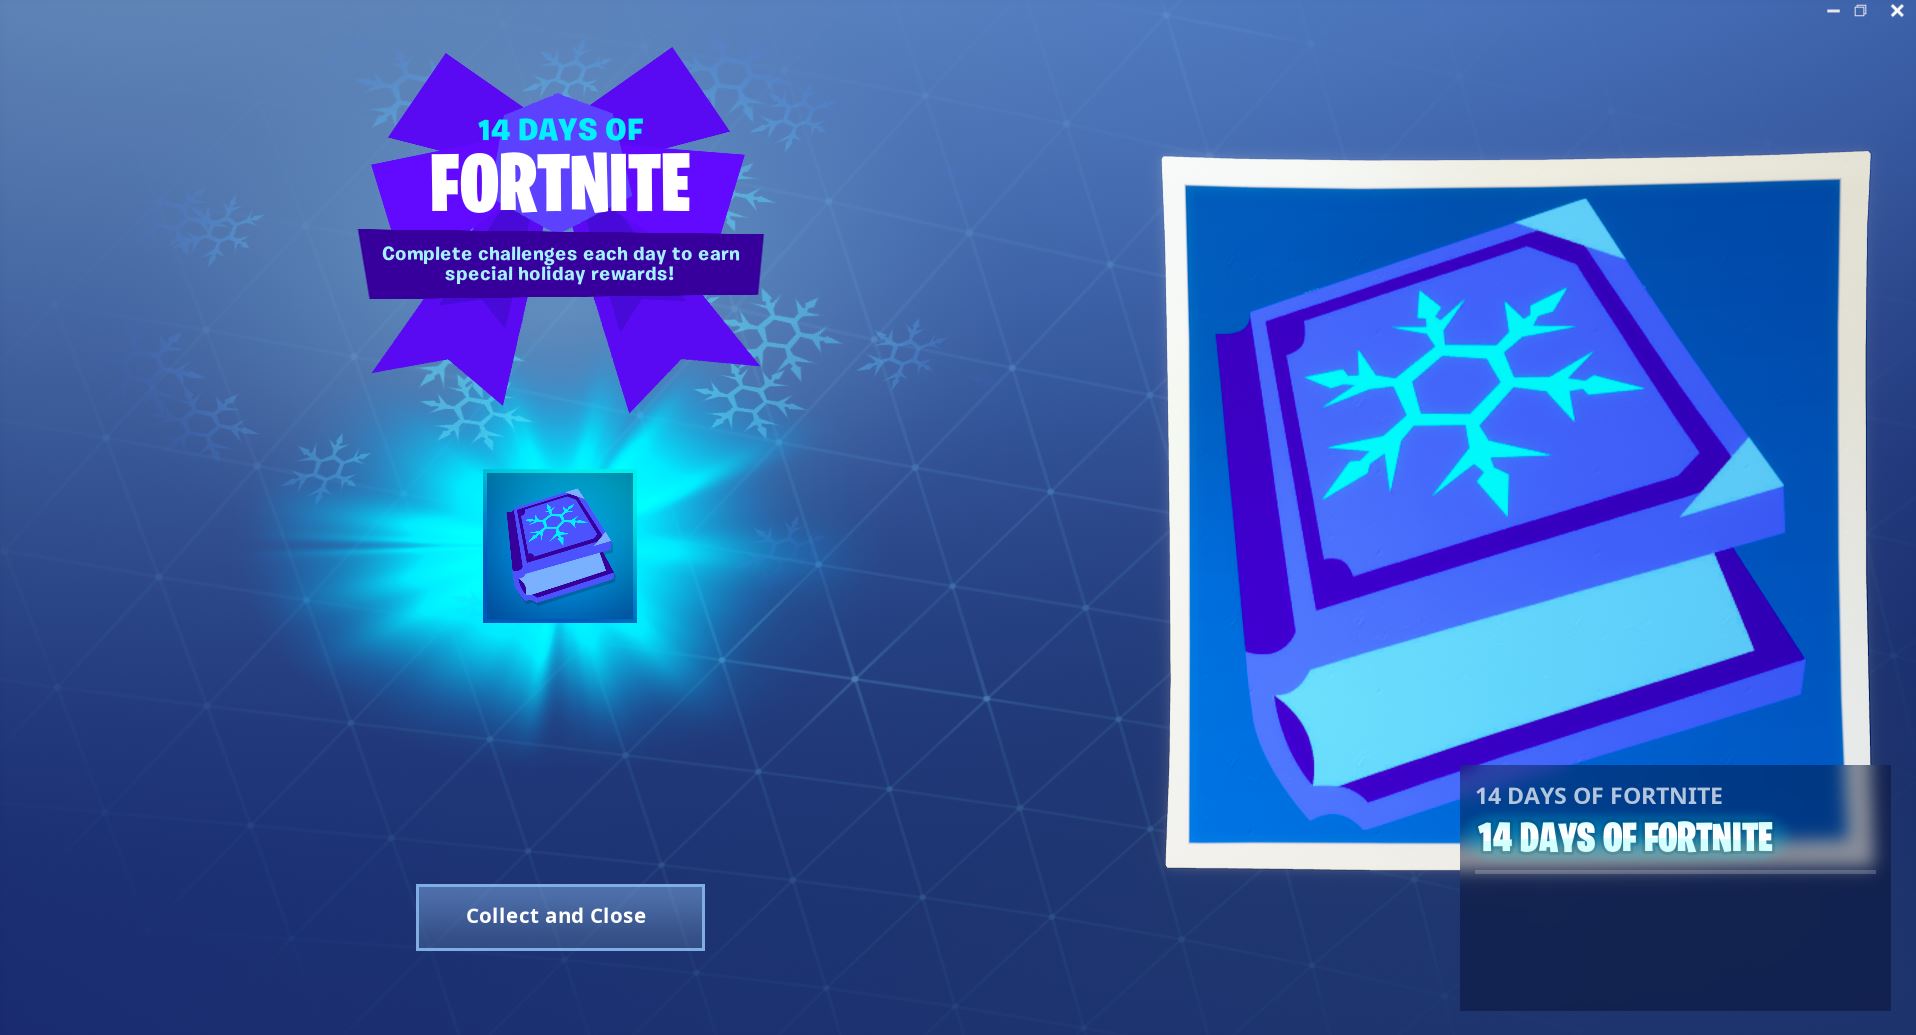 14 days of Fortnite Message